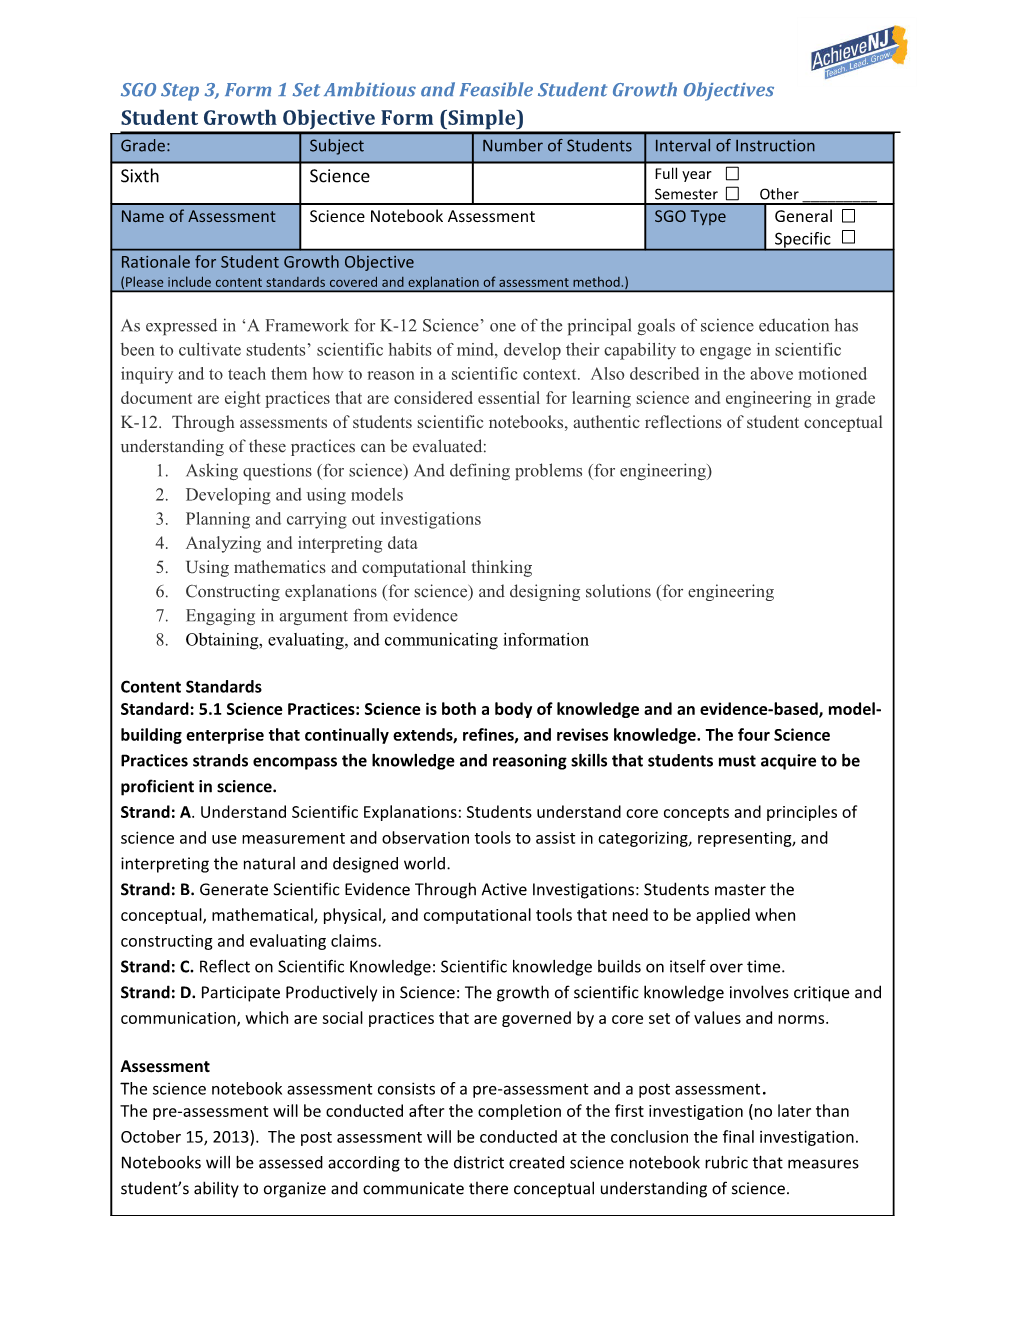 SGO Step 3, Form 1 Set Ambitious and Feasible Student Growth Objectives